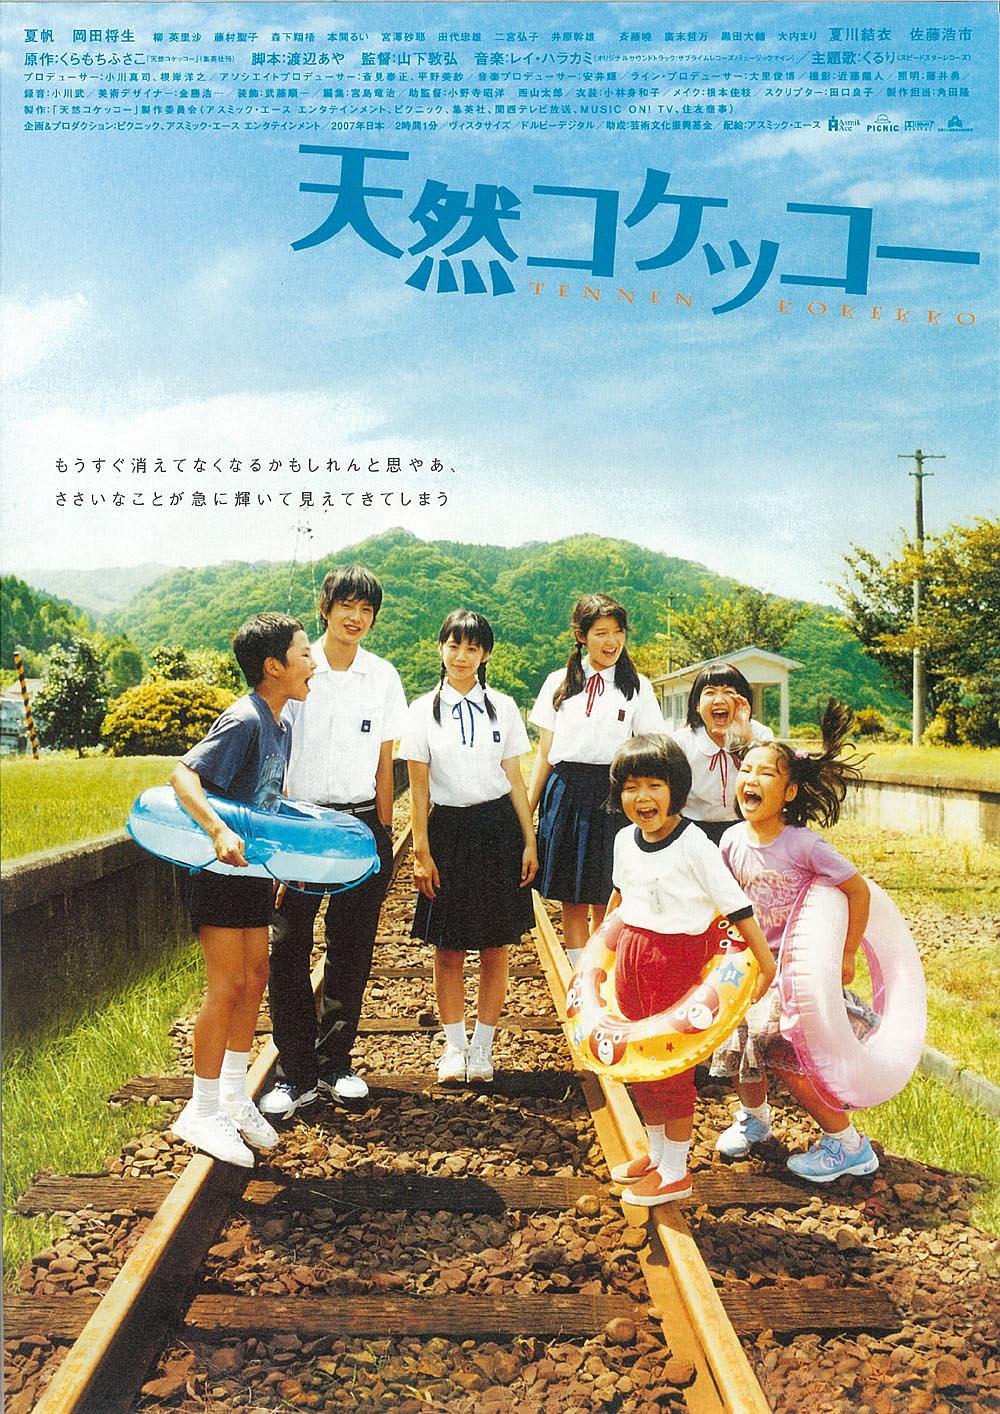 Ȼӽṹ A.Gentle.Breeze.in.the.Village.2007.720p.BluRay.x264-REGRET 5.47GB-1.png